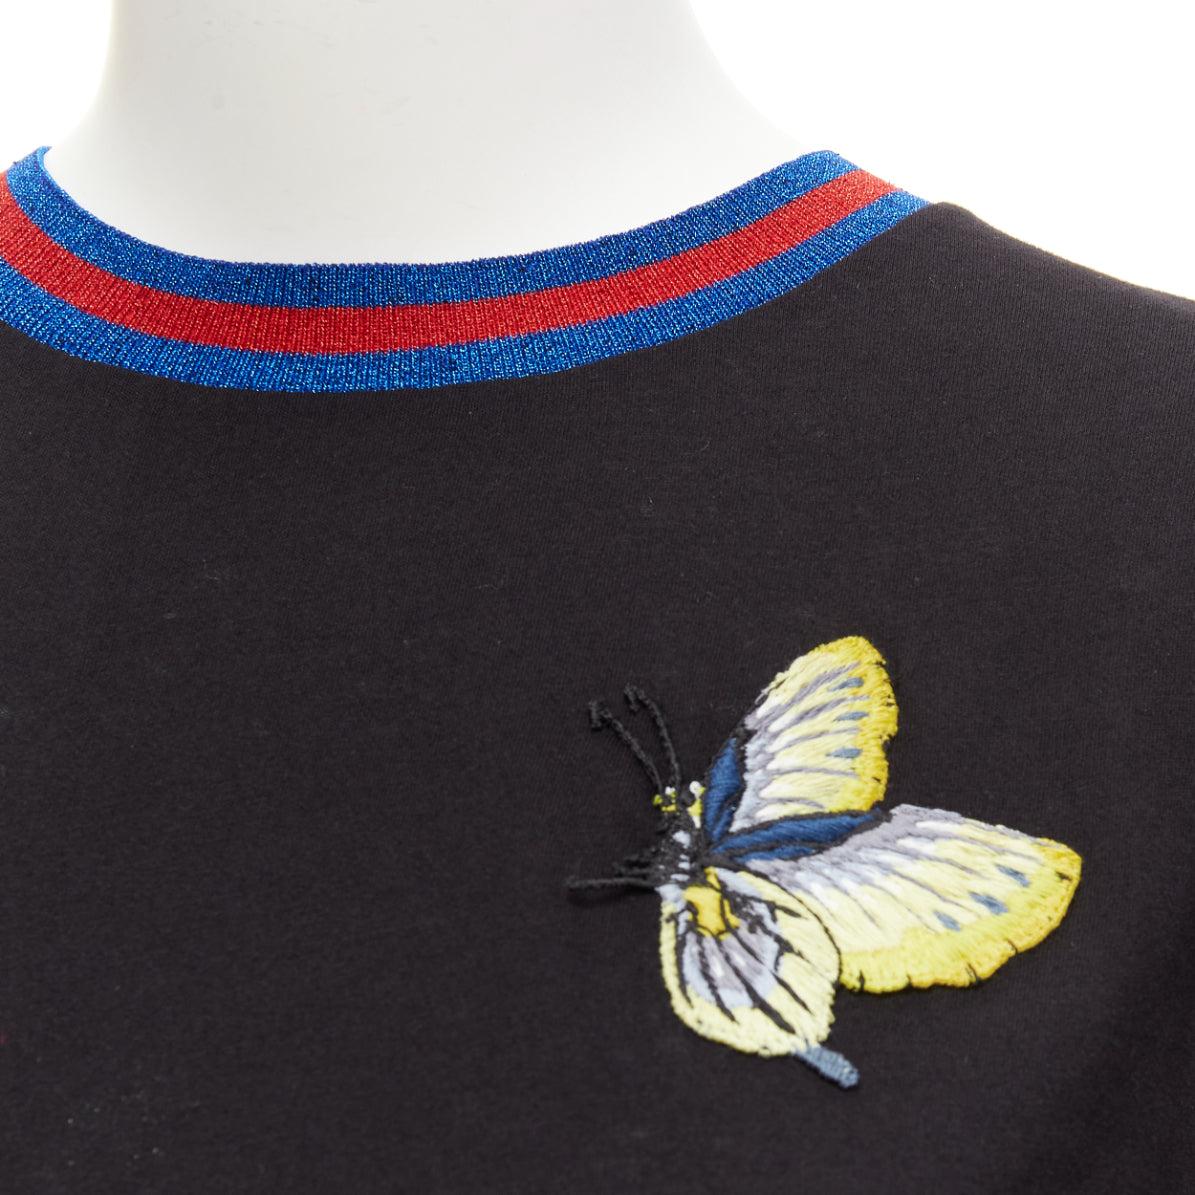 GUCCI black yellow butterfly embroidery patch blue red web tshirt XS
Reference: AAWC/A00760
Brand: Gucci
Designer: Alessandro Michele
Material: Cotton
Color: Black, Multicolour
Pattern: Solid
Closure: Slip On
Lining: Black Cotton
Extra Details: Web